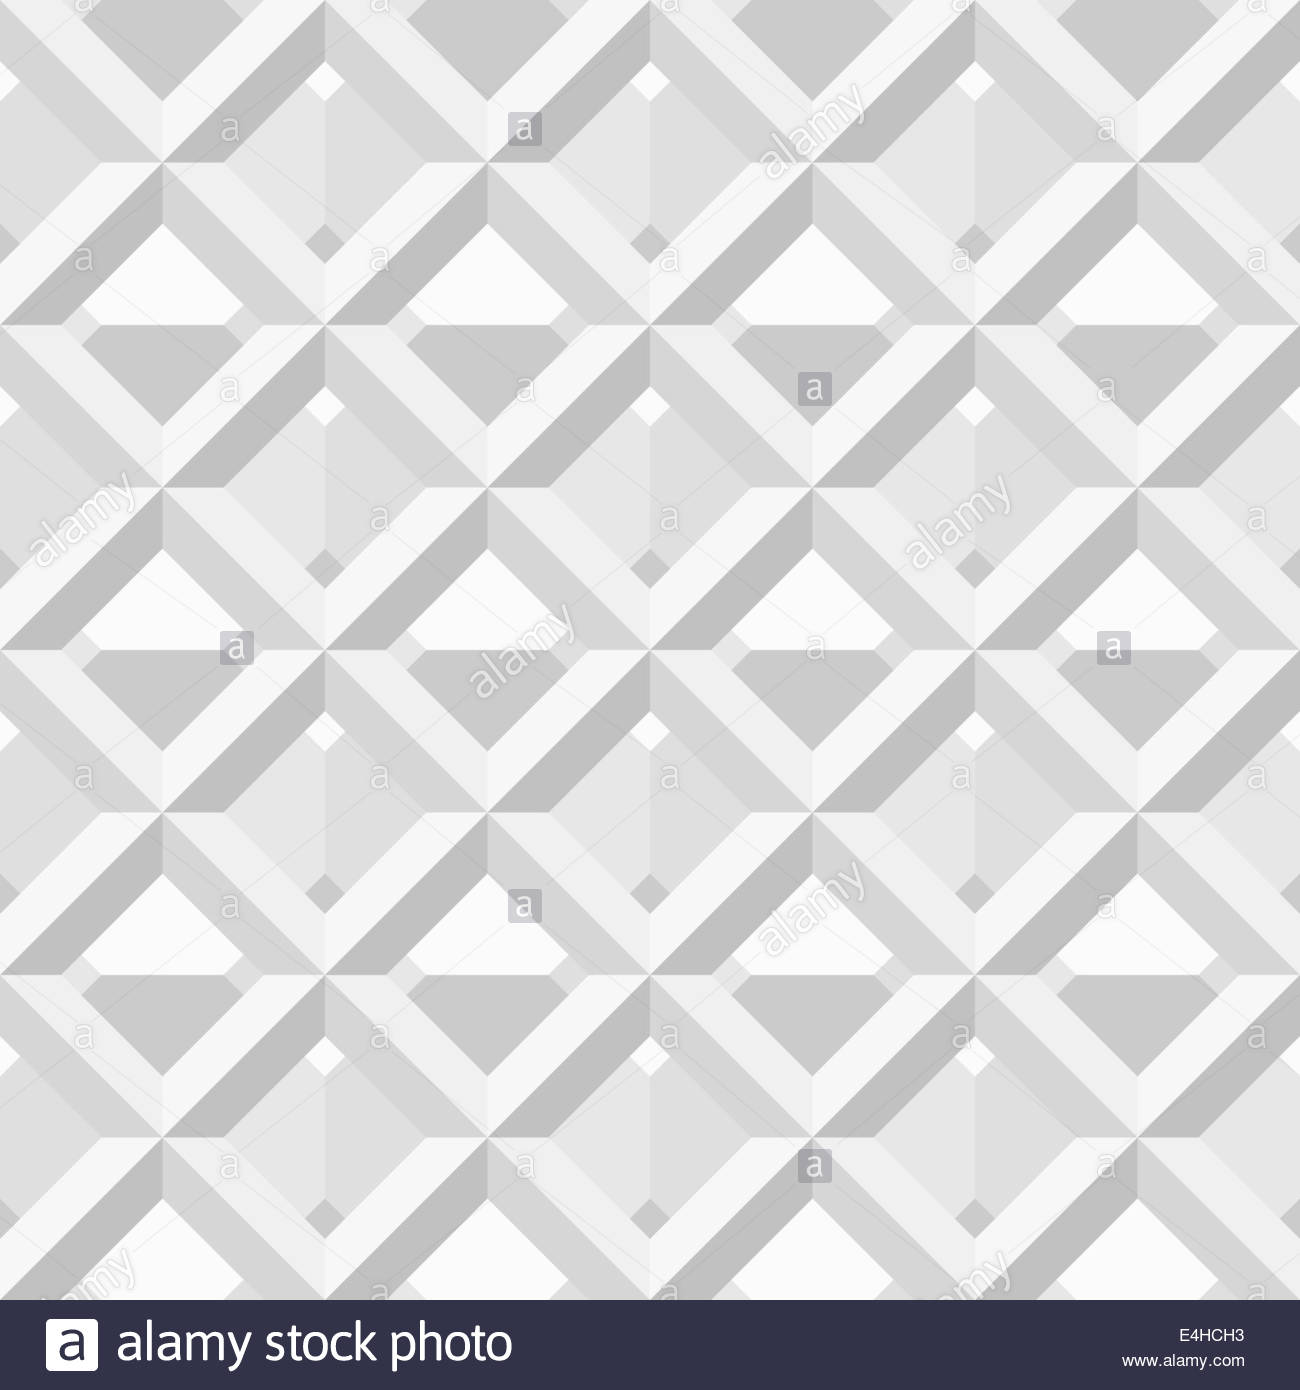 Seamless pattern   white and black geometric background The